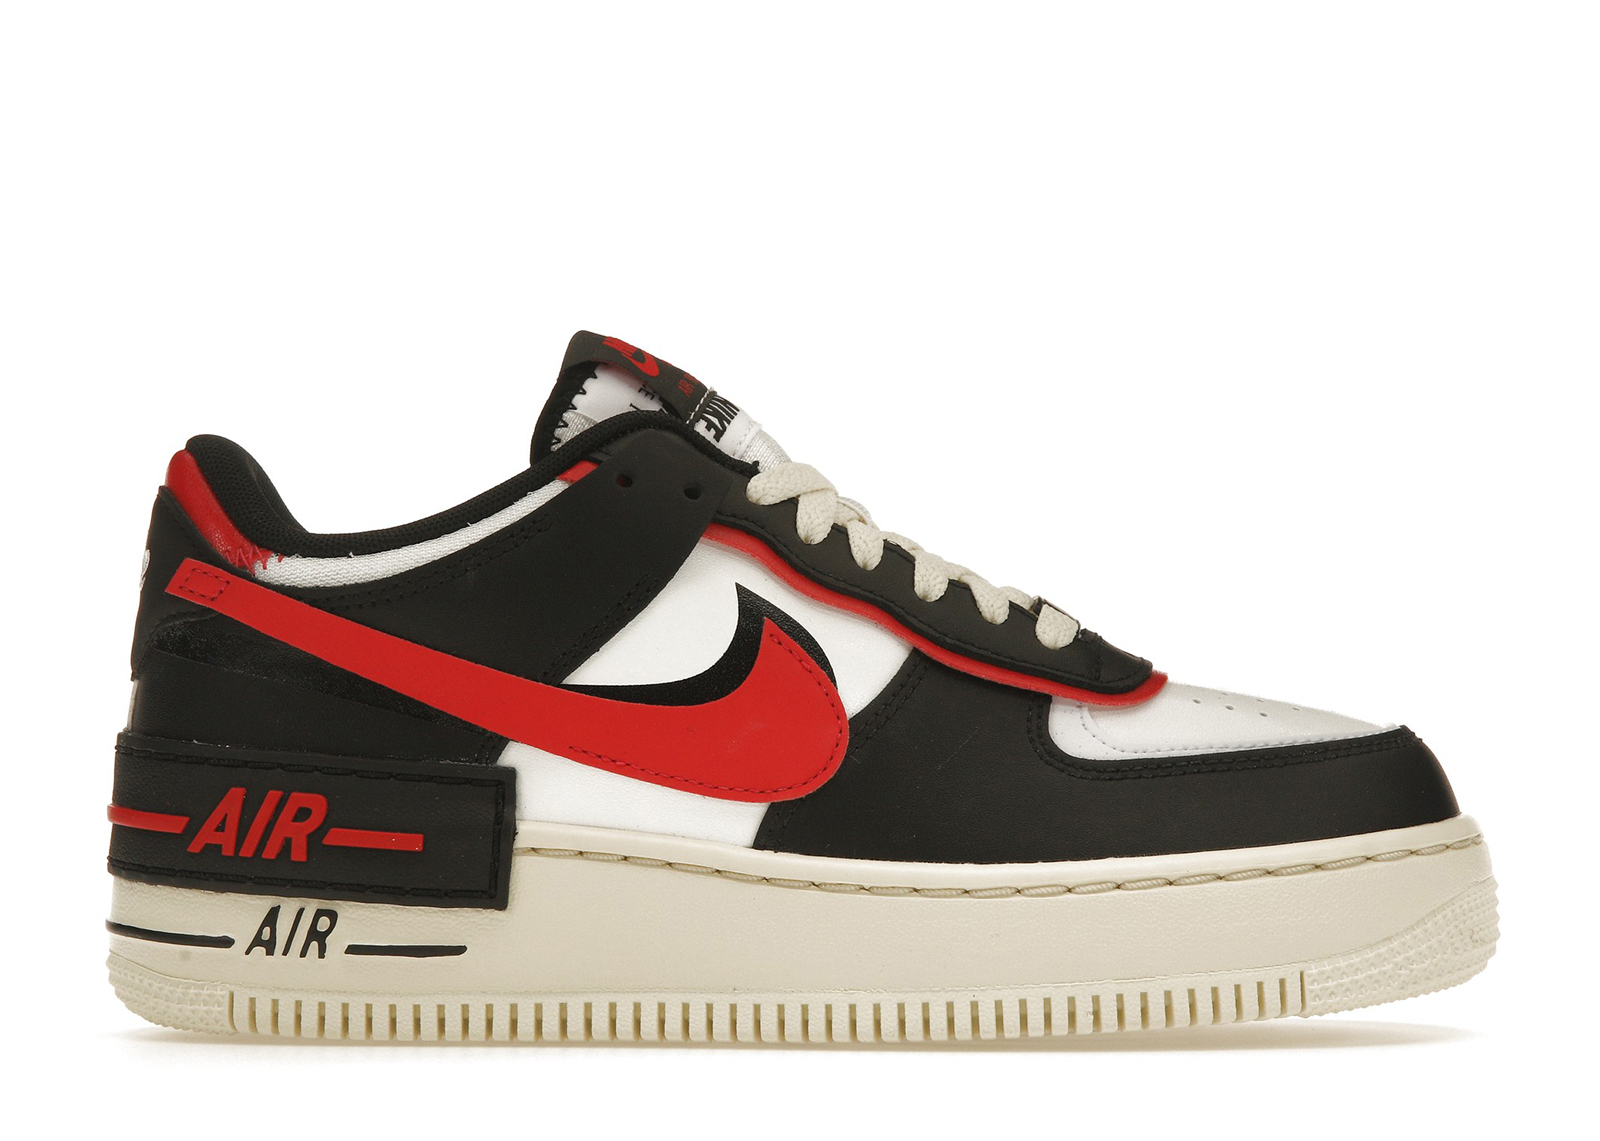 Nike Air Force 1 Low Shadow Summit White University Red Black 